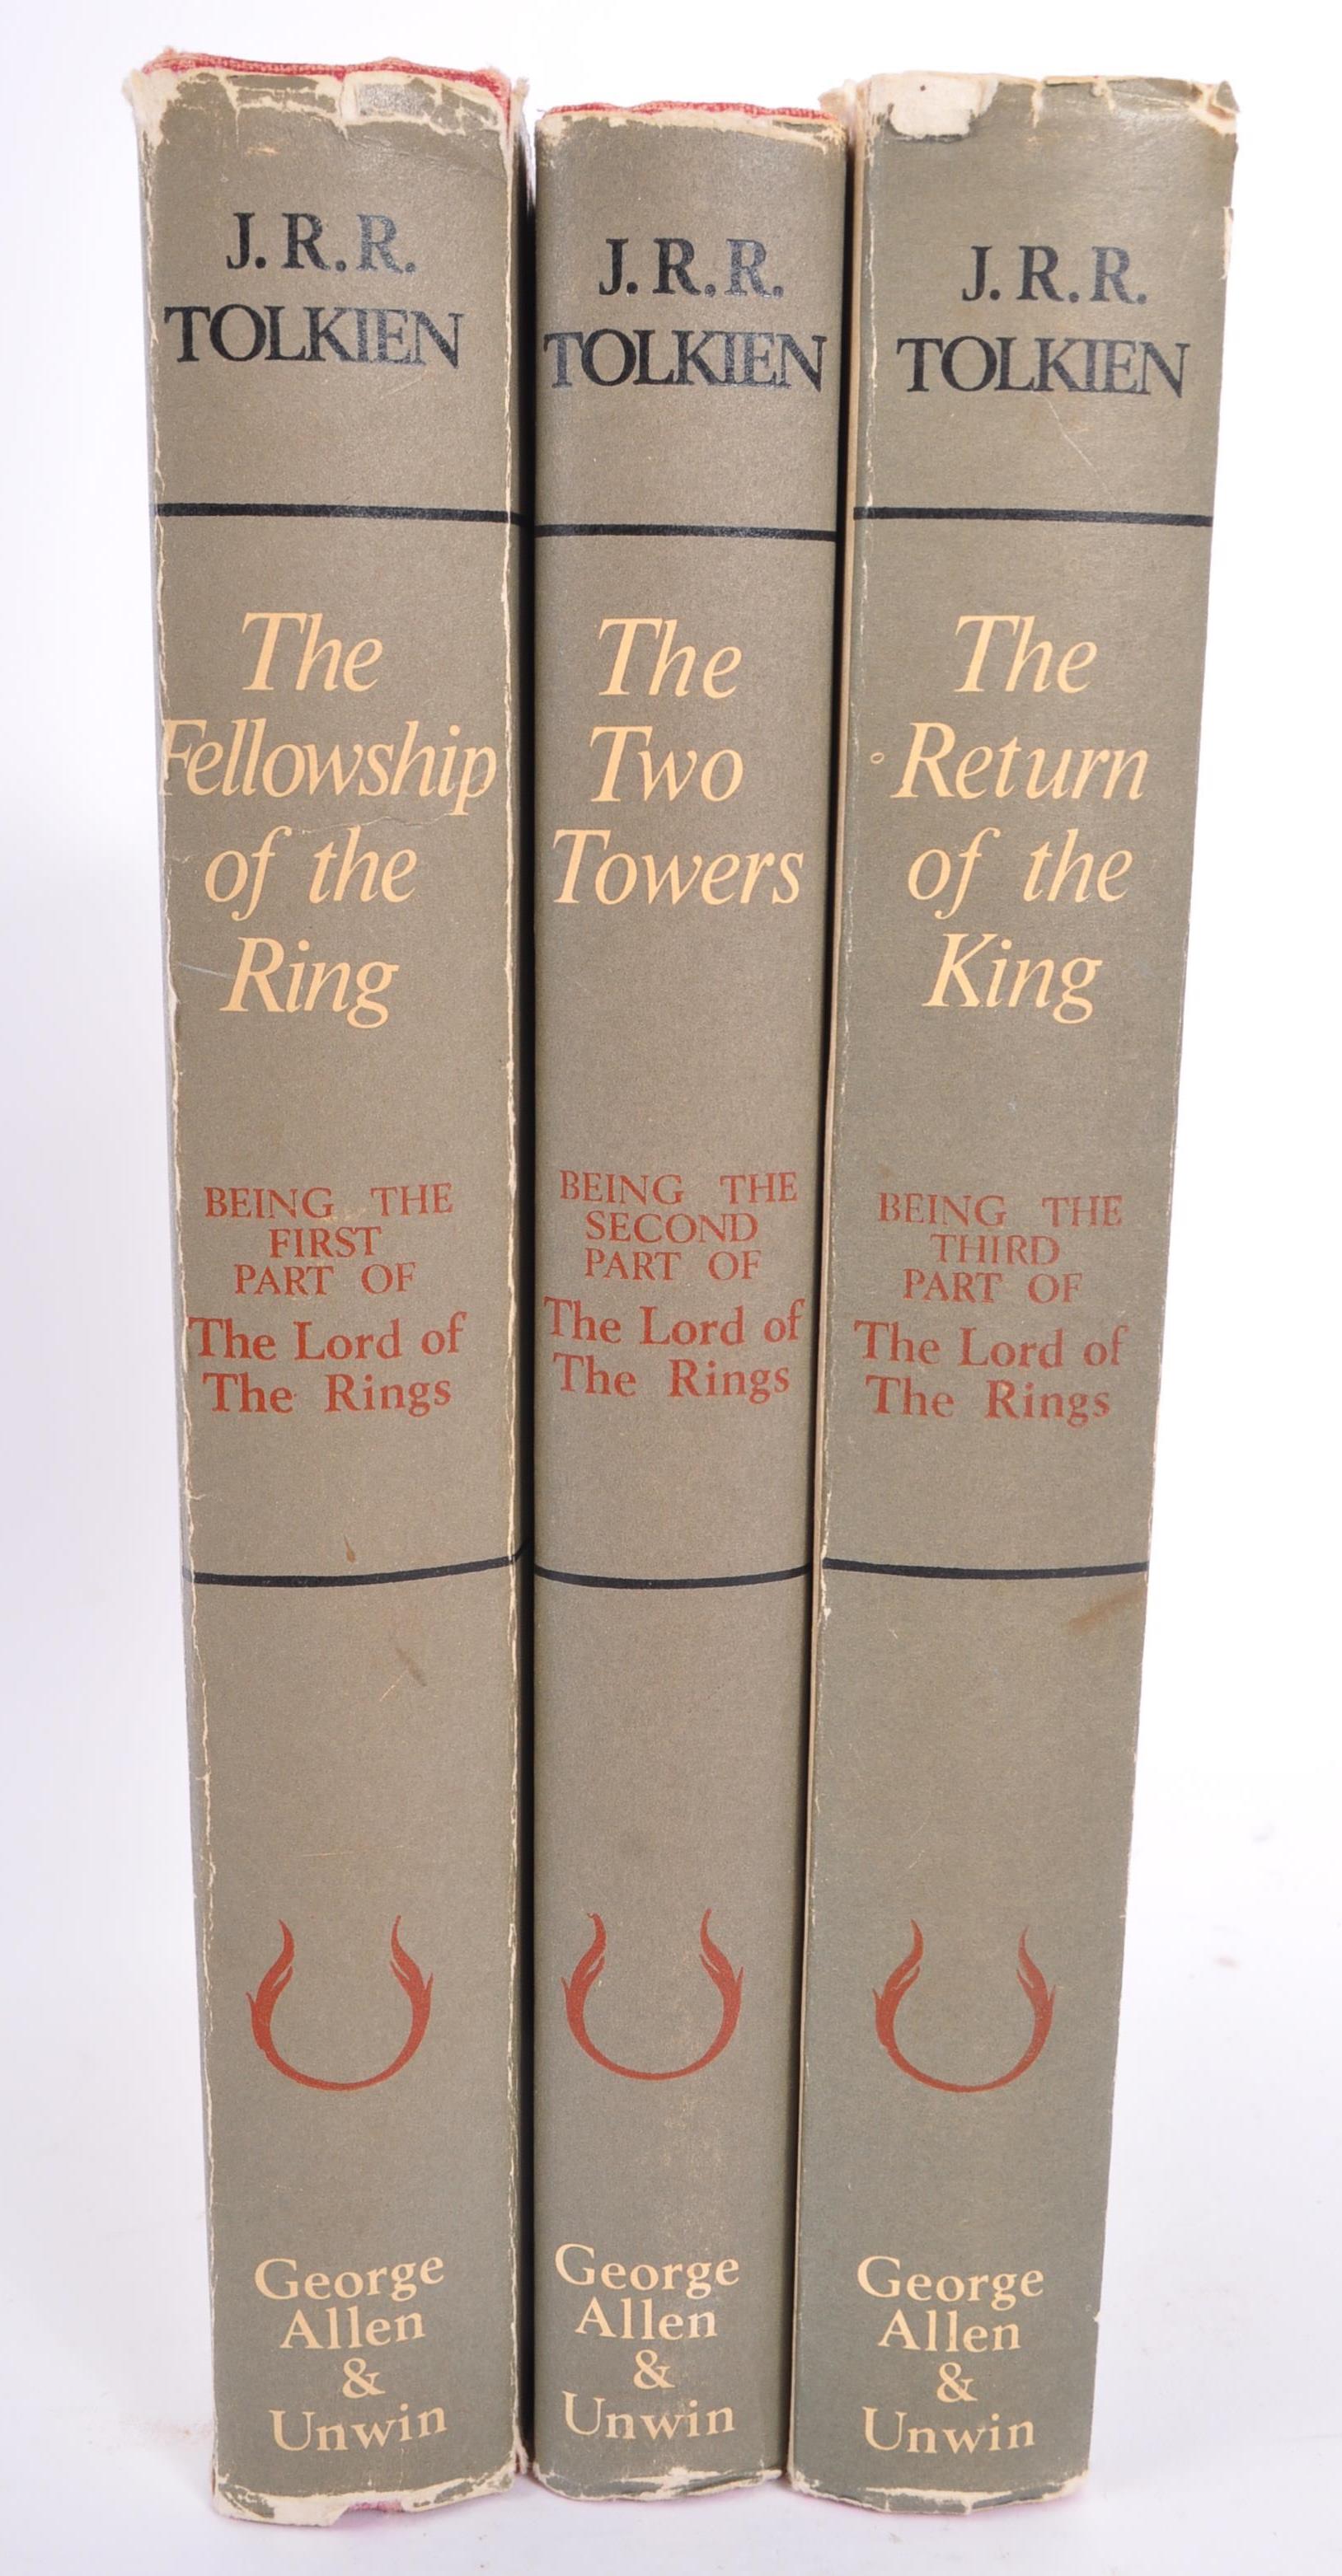 J. R. R. TOLKIEN - LORD OF THE RINGS - THREE 1960S HARDBACK BOOKS - Image 8 of 16